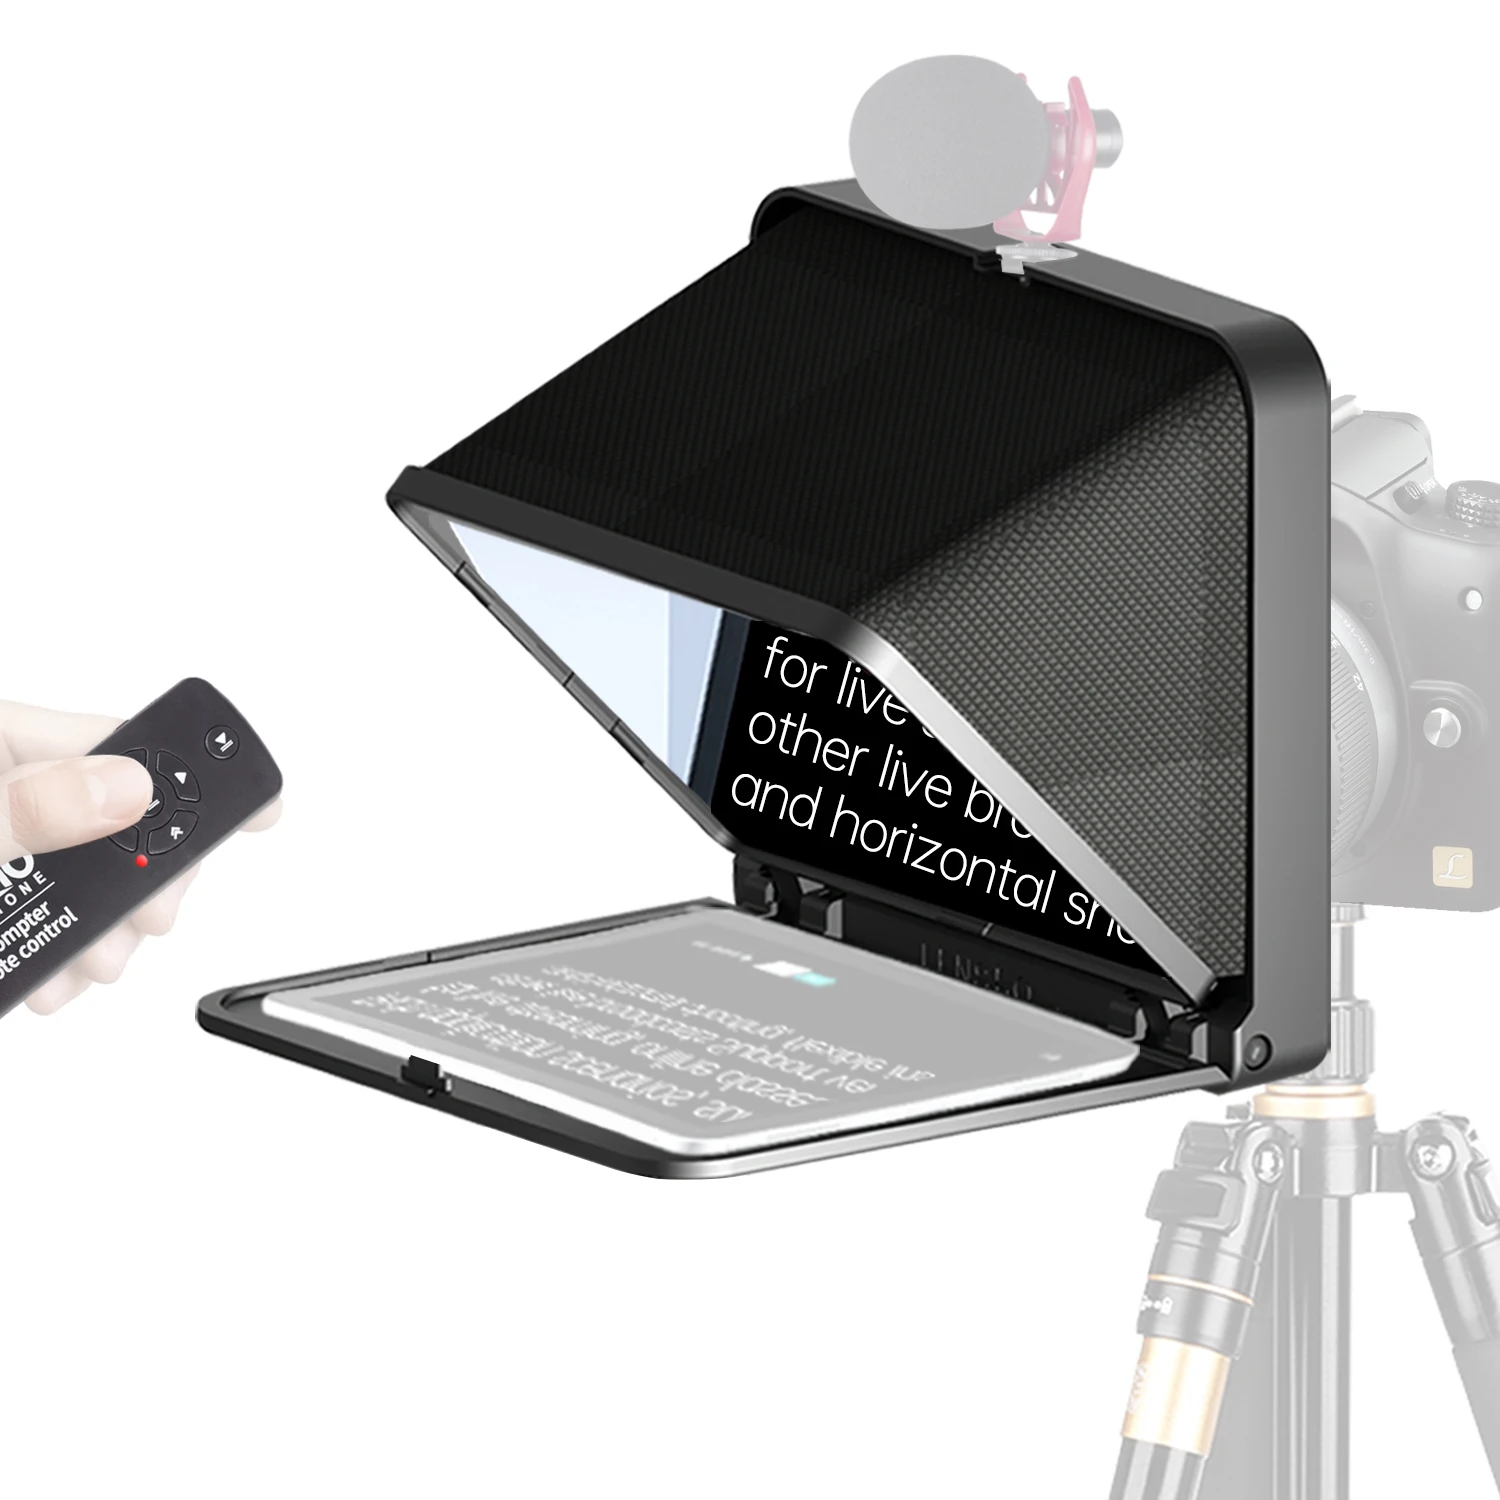 LENSGO TC7 Fold Prompter Portable Teleprompter For Phone Camera for Live Interview Video for 7.9 inch Tablet iPad Smartphon New enlarge